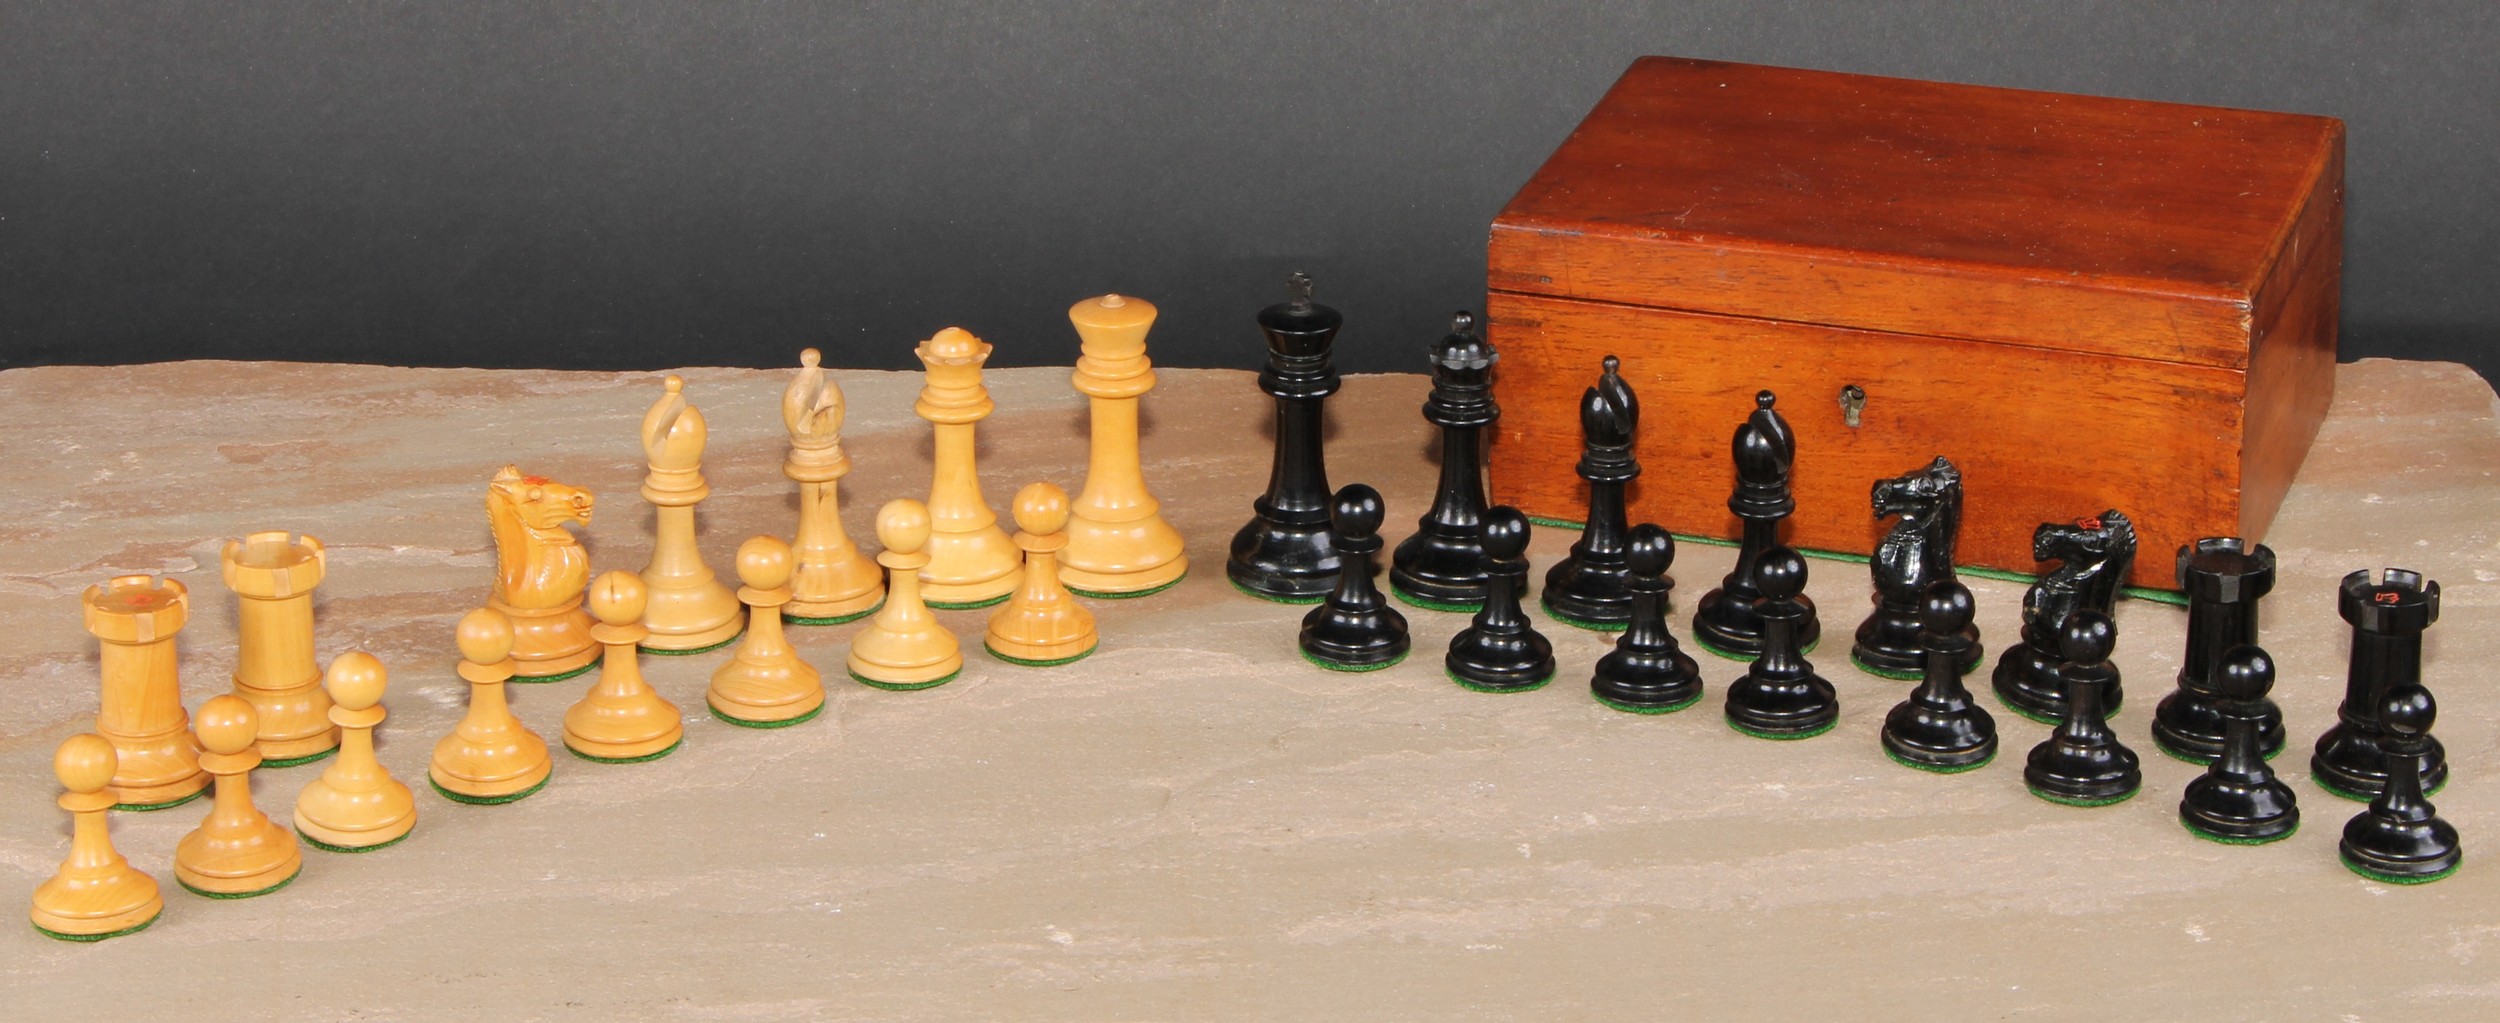 A boxwood and ebonised Staunton chess set, marked for King’s side, the Kings 7cm high, mahogany box